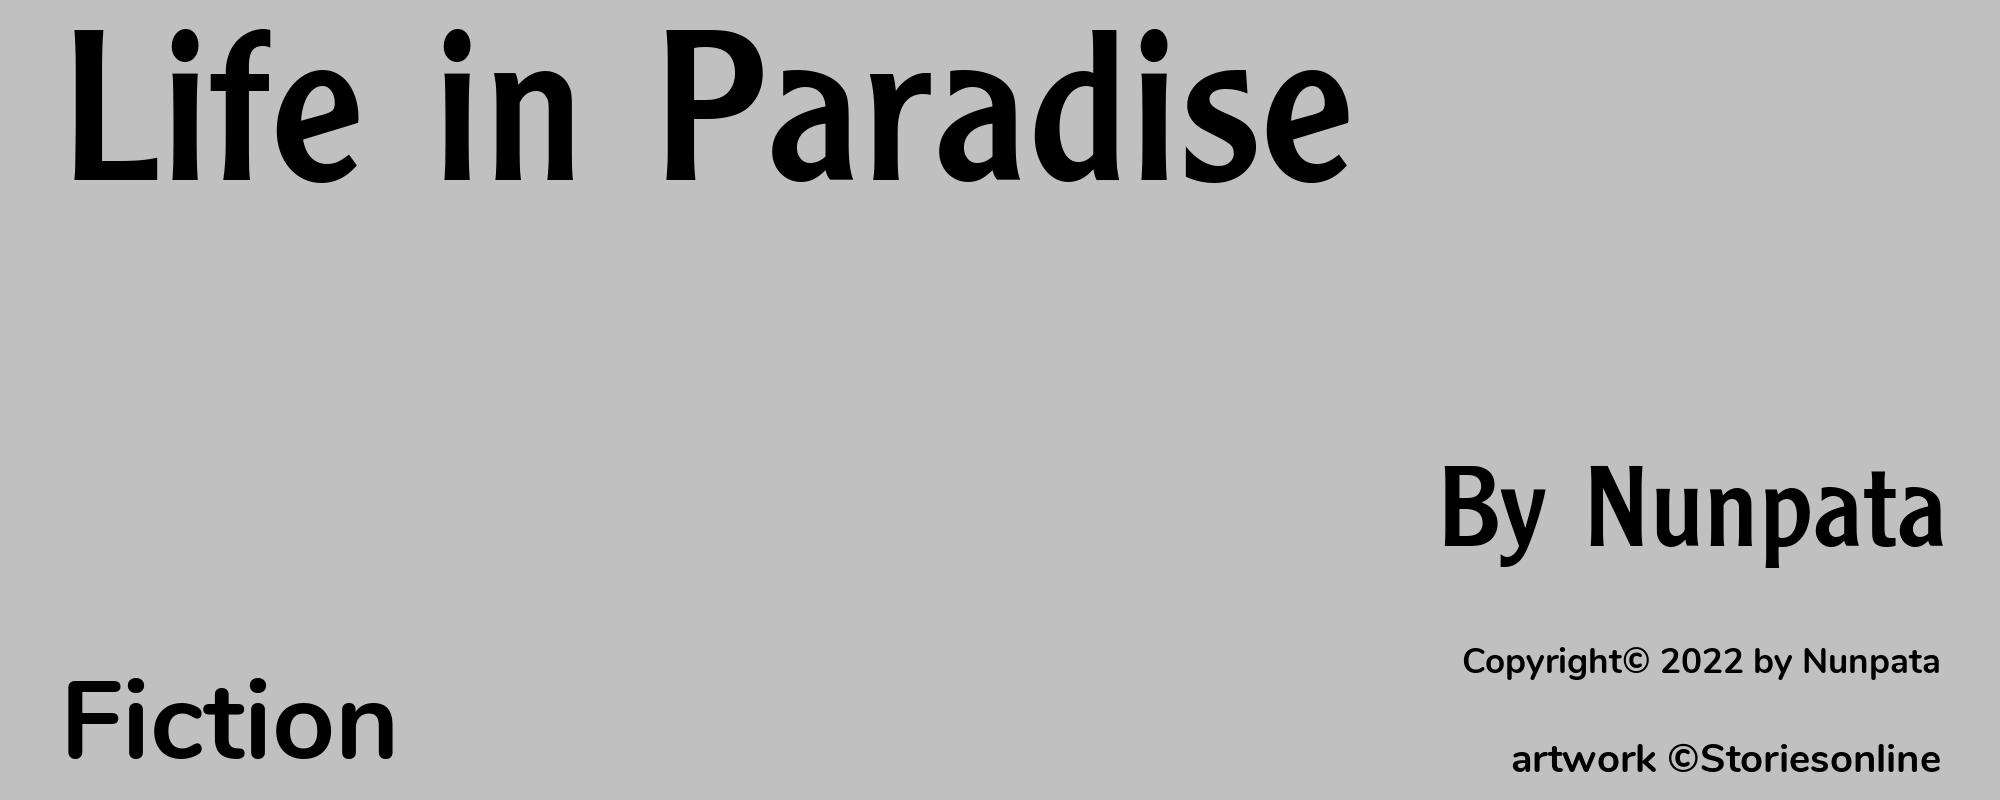 Life in Paradise - Cover